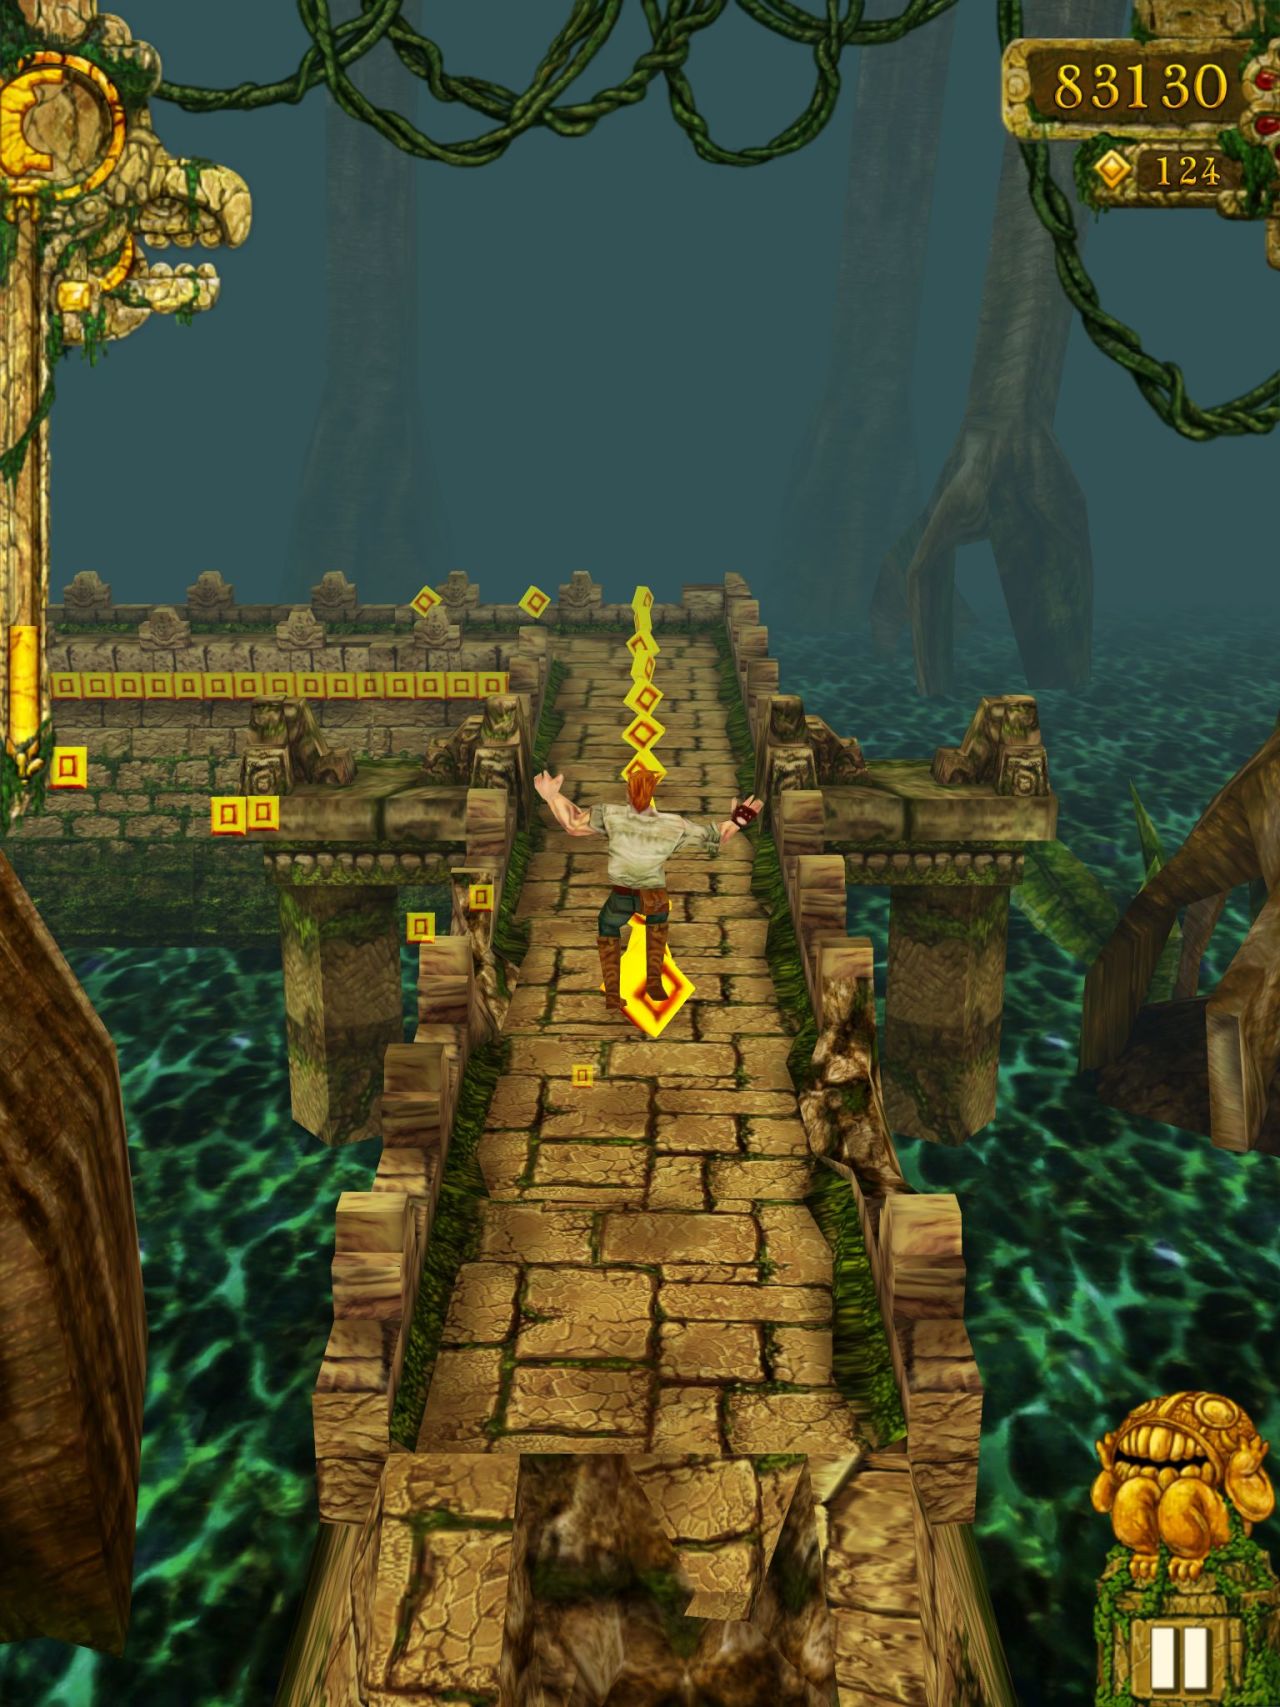 Temple Run stands as one of the most successful game franchises since its arrival in 2011.  Imangi Studios announced in June that Temple Run and Temple Run 2 have now surpassed one billion downloads.